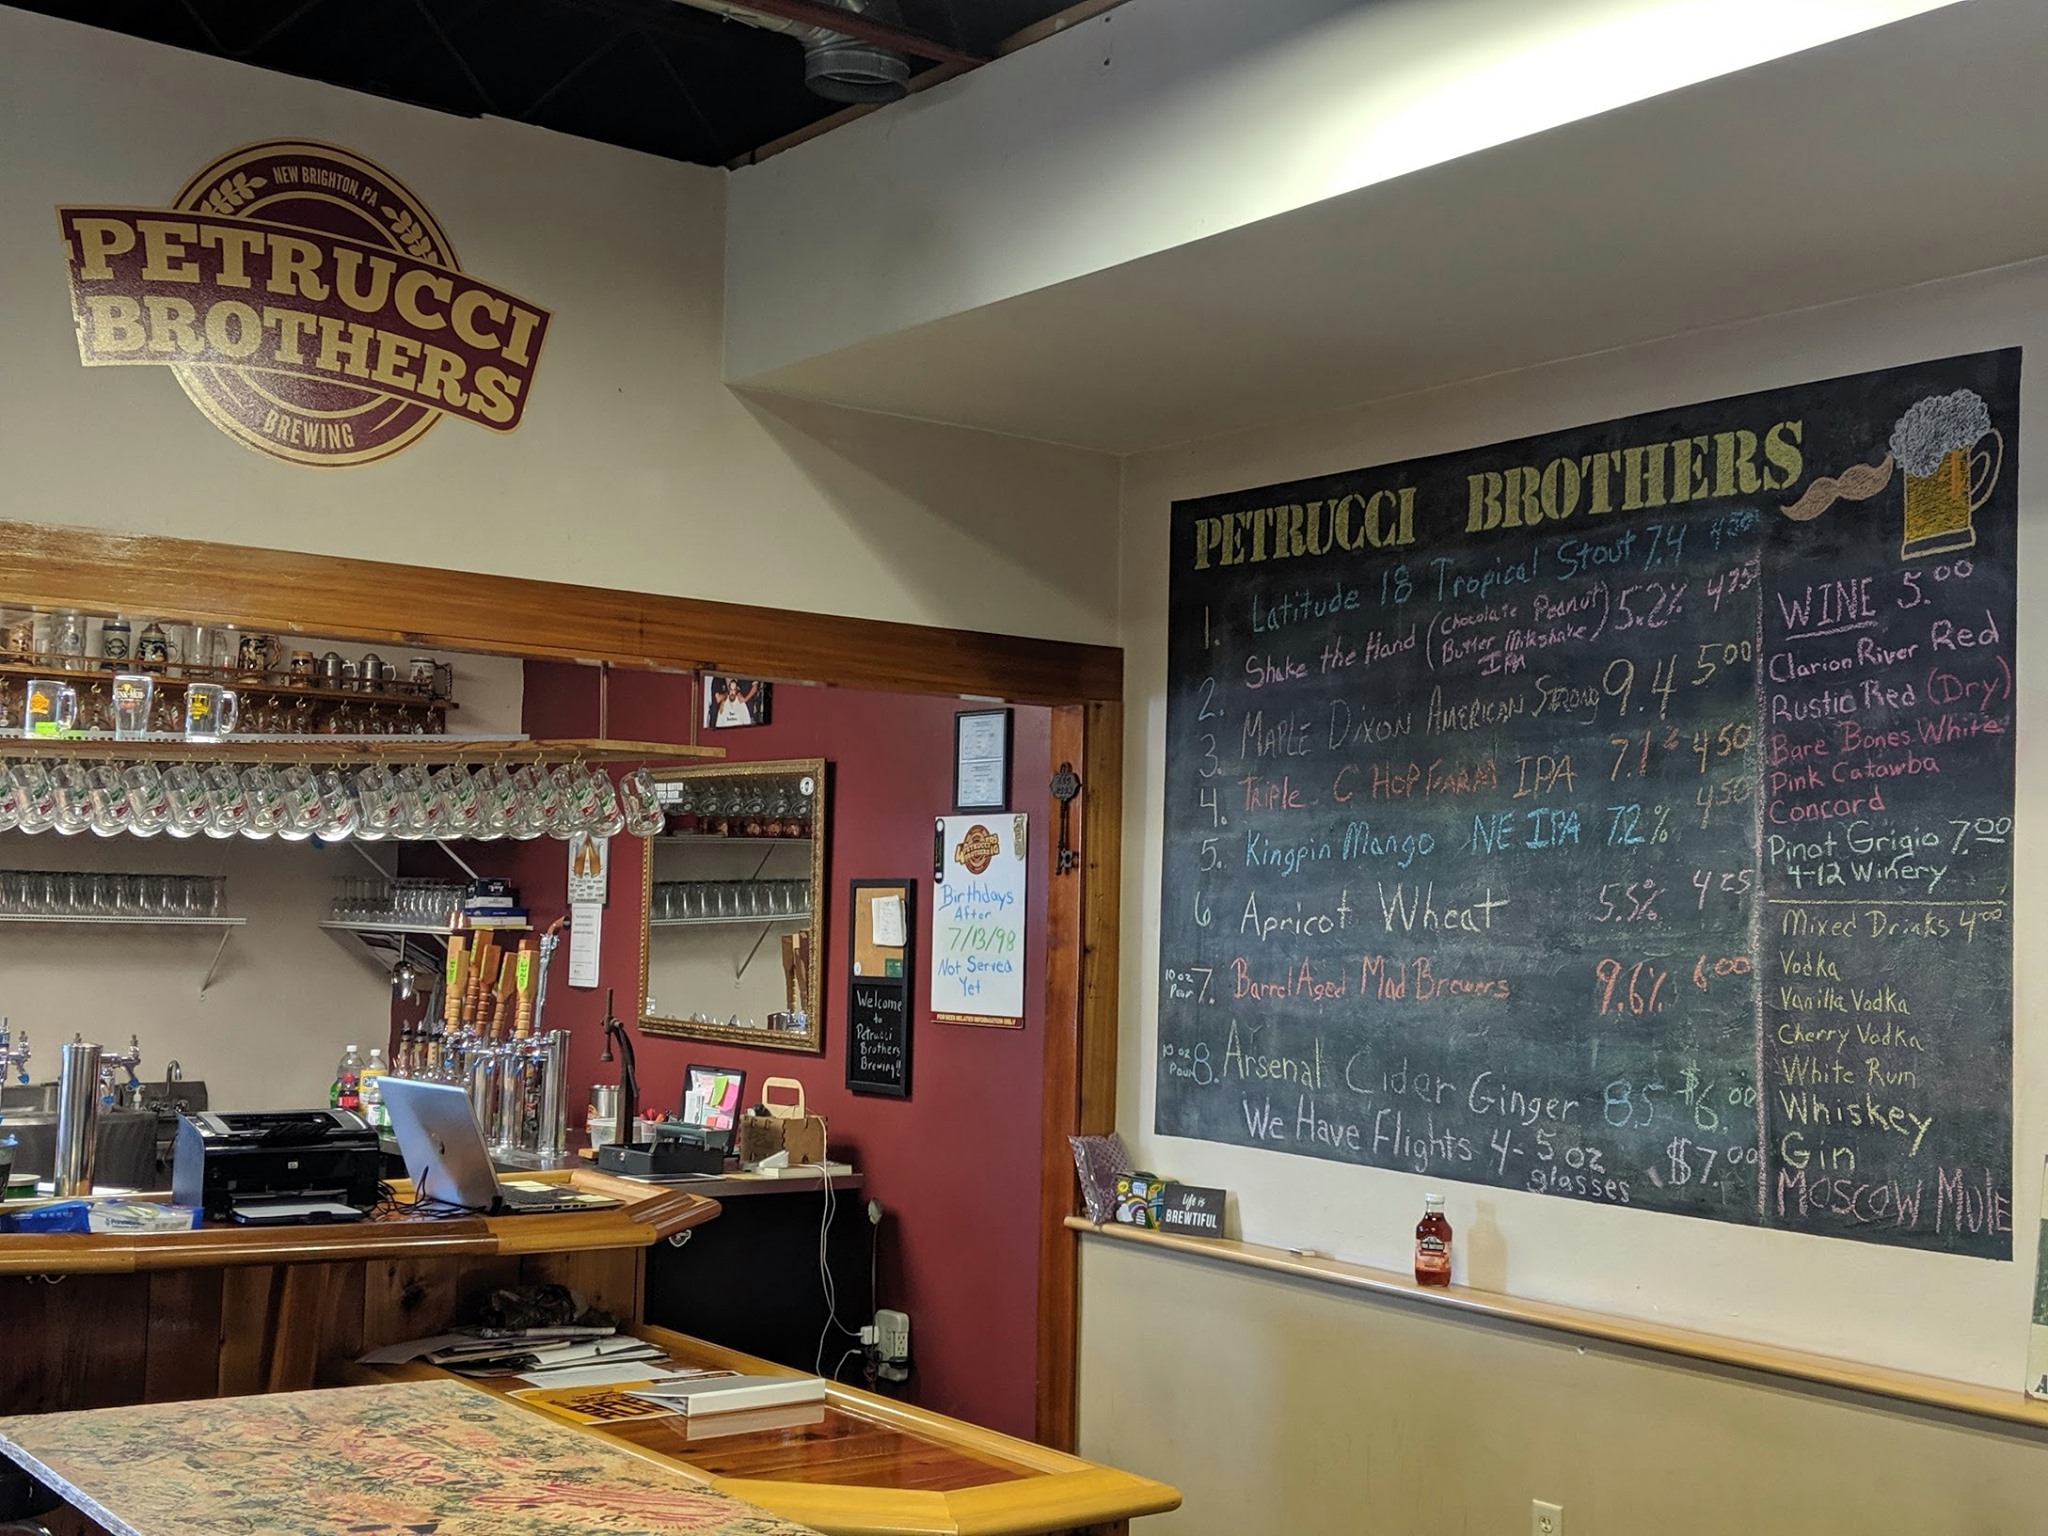 Petrucci Brothers Brewing